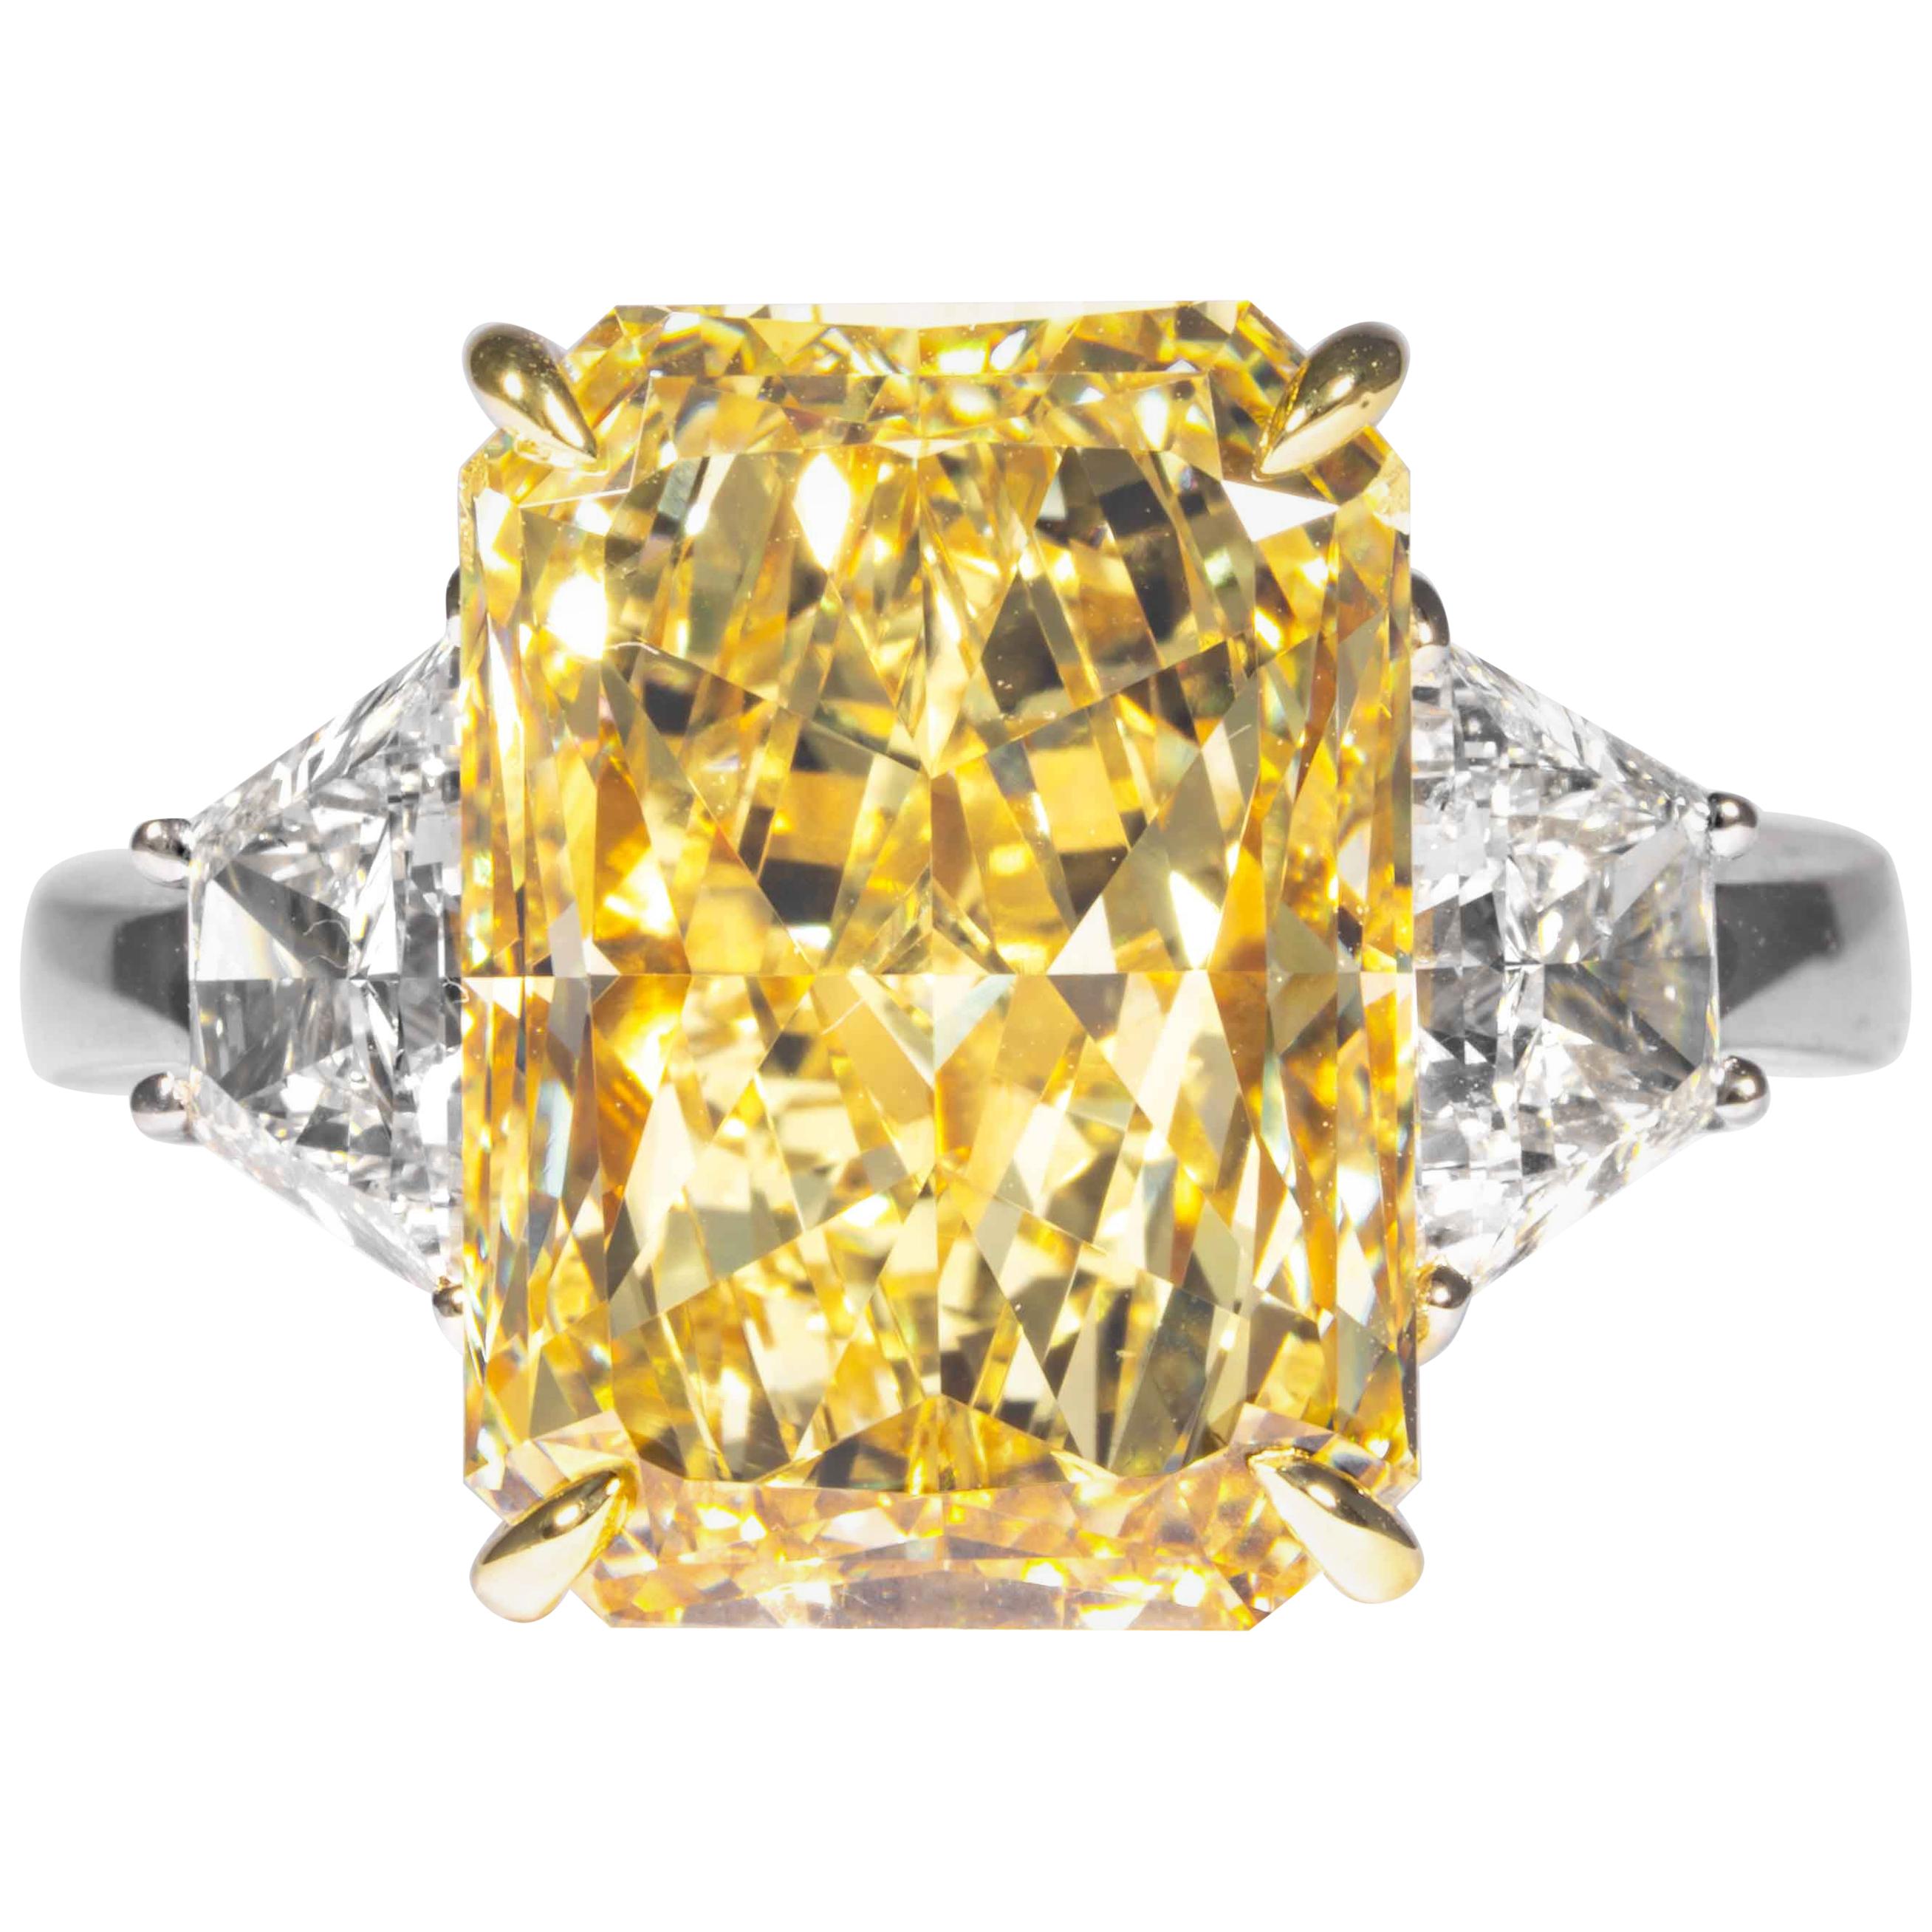 Shreve, Crump & Low GIA Certified 7.95 Carat Fancy Yellow Radiant Diamond Ring For Sale